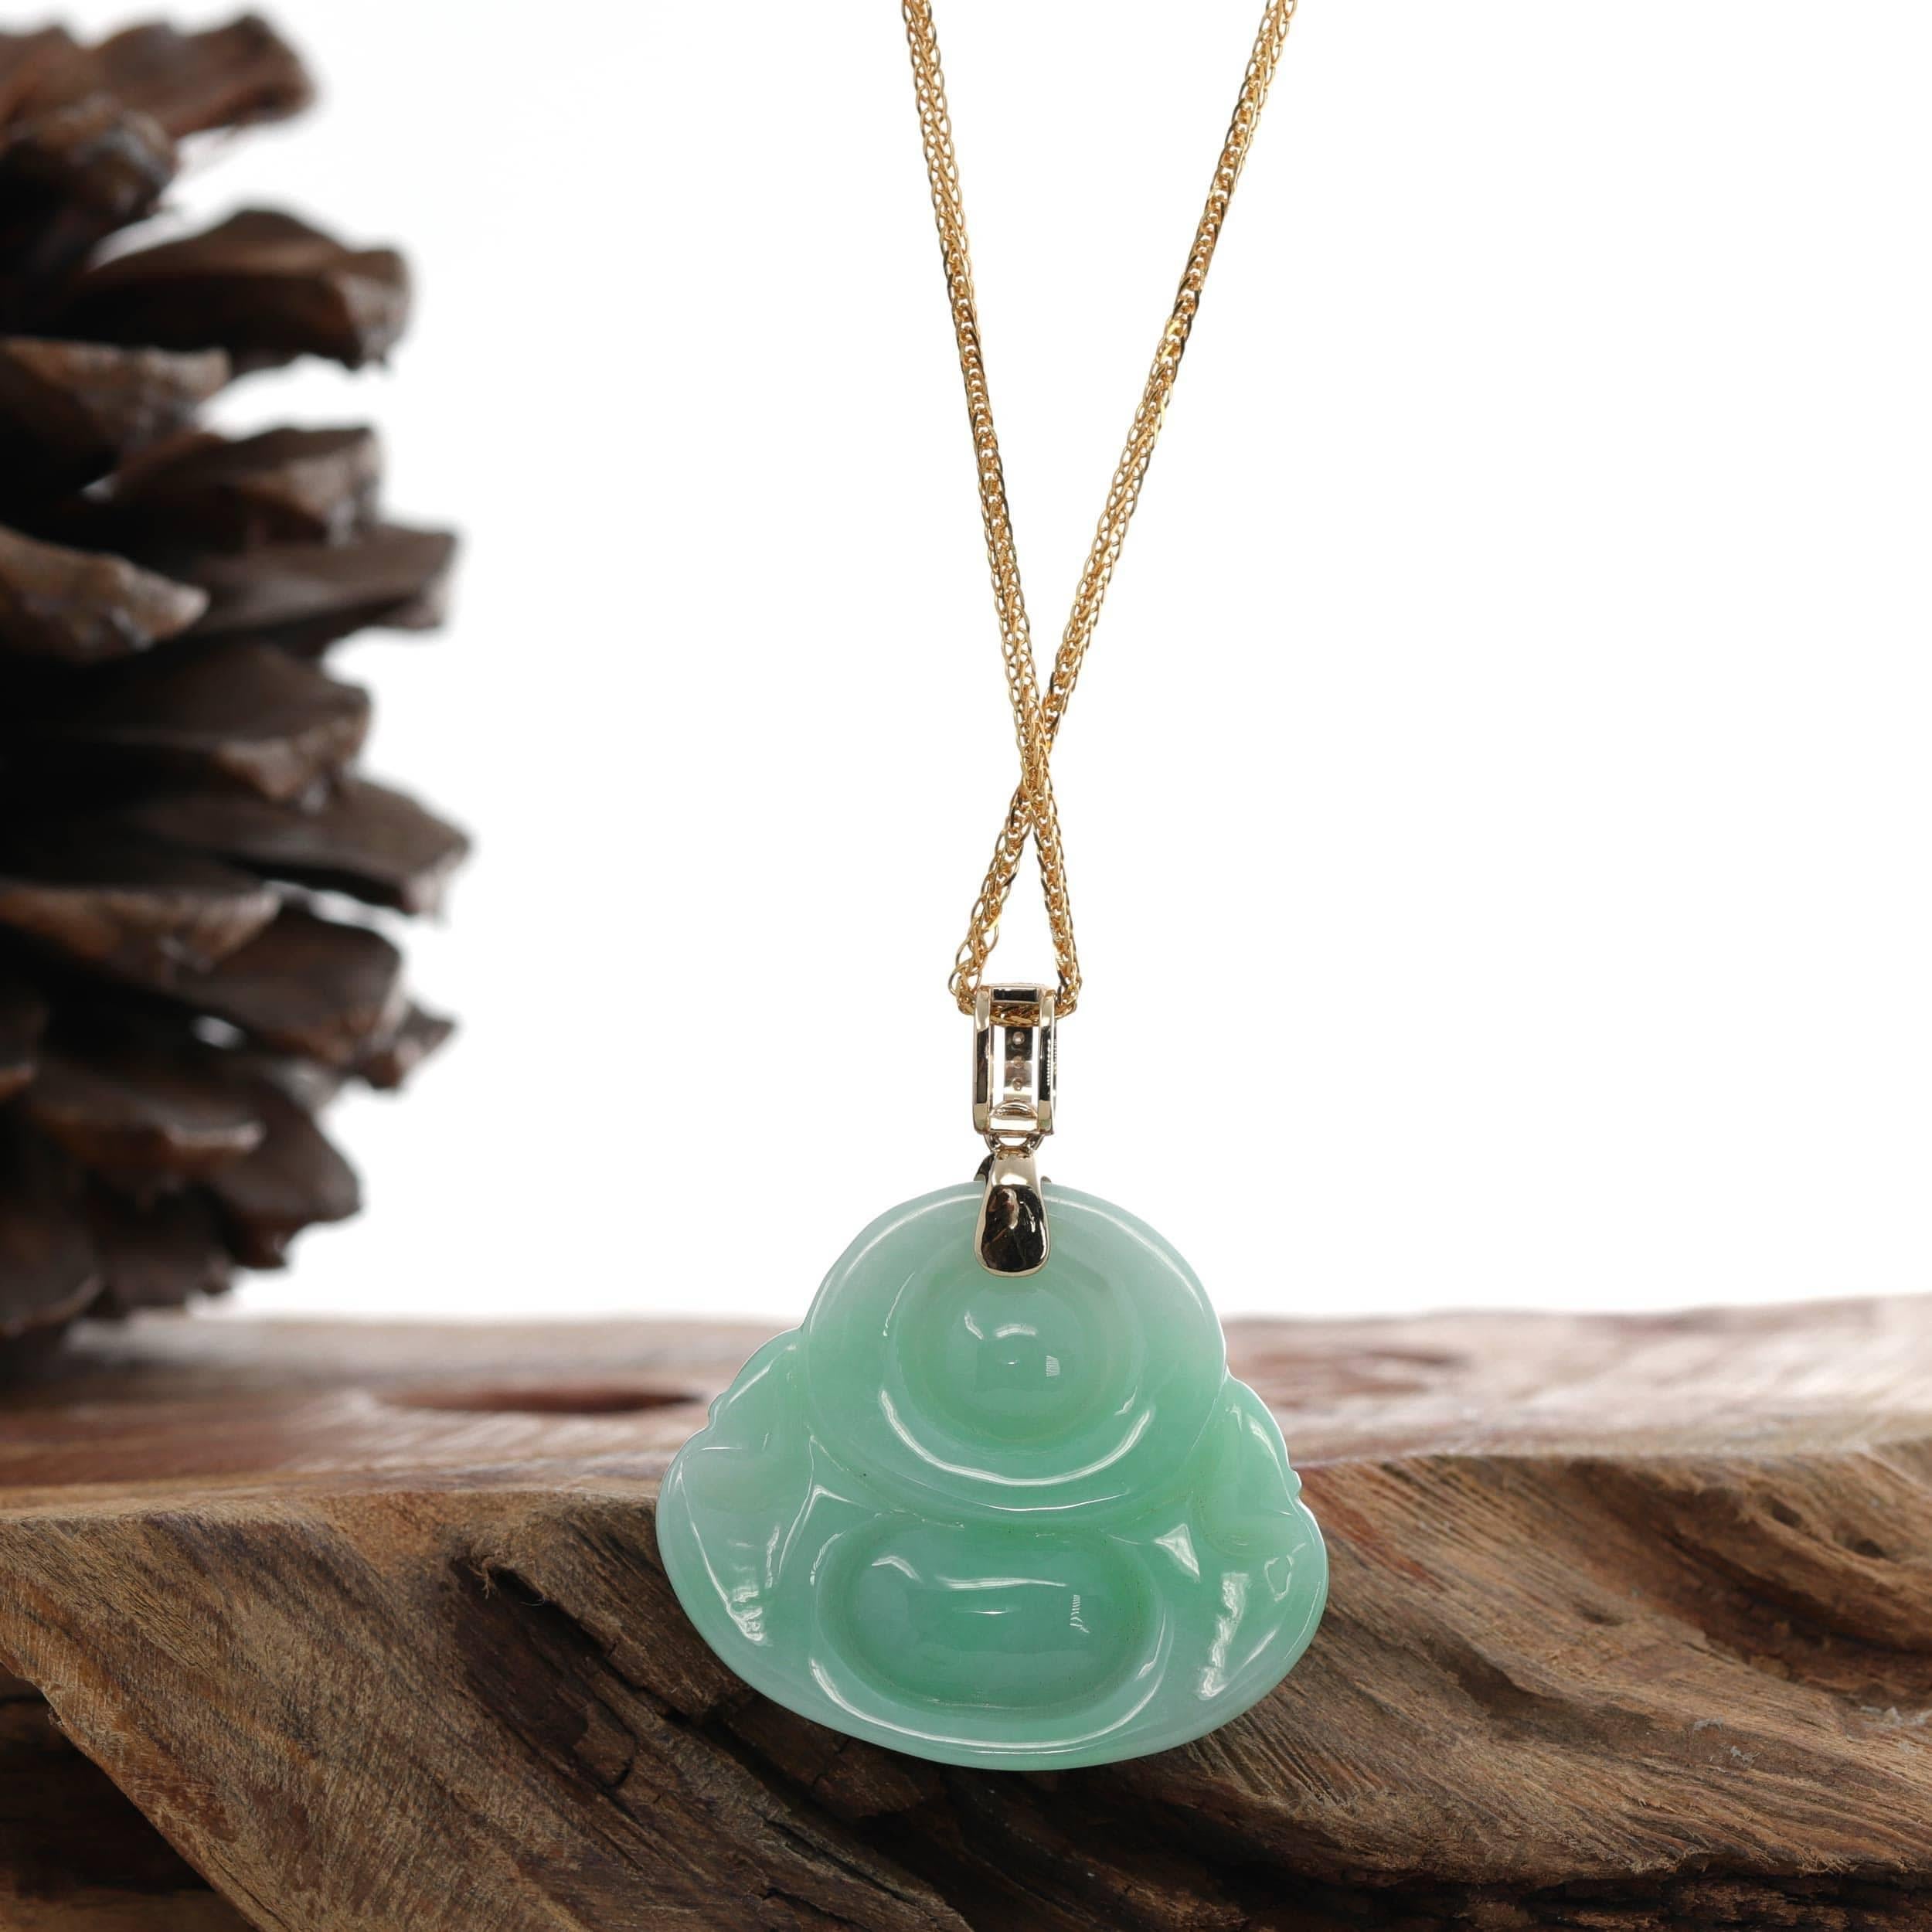 buddha necklace meaning colors